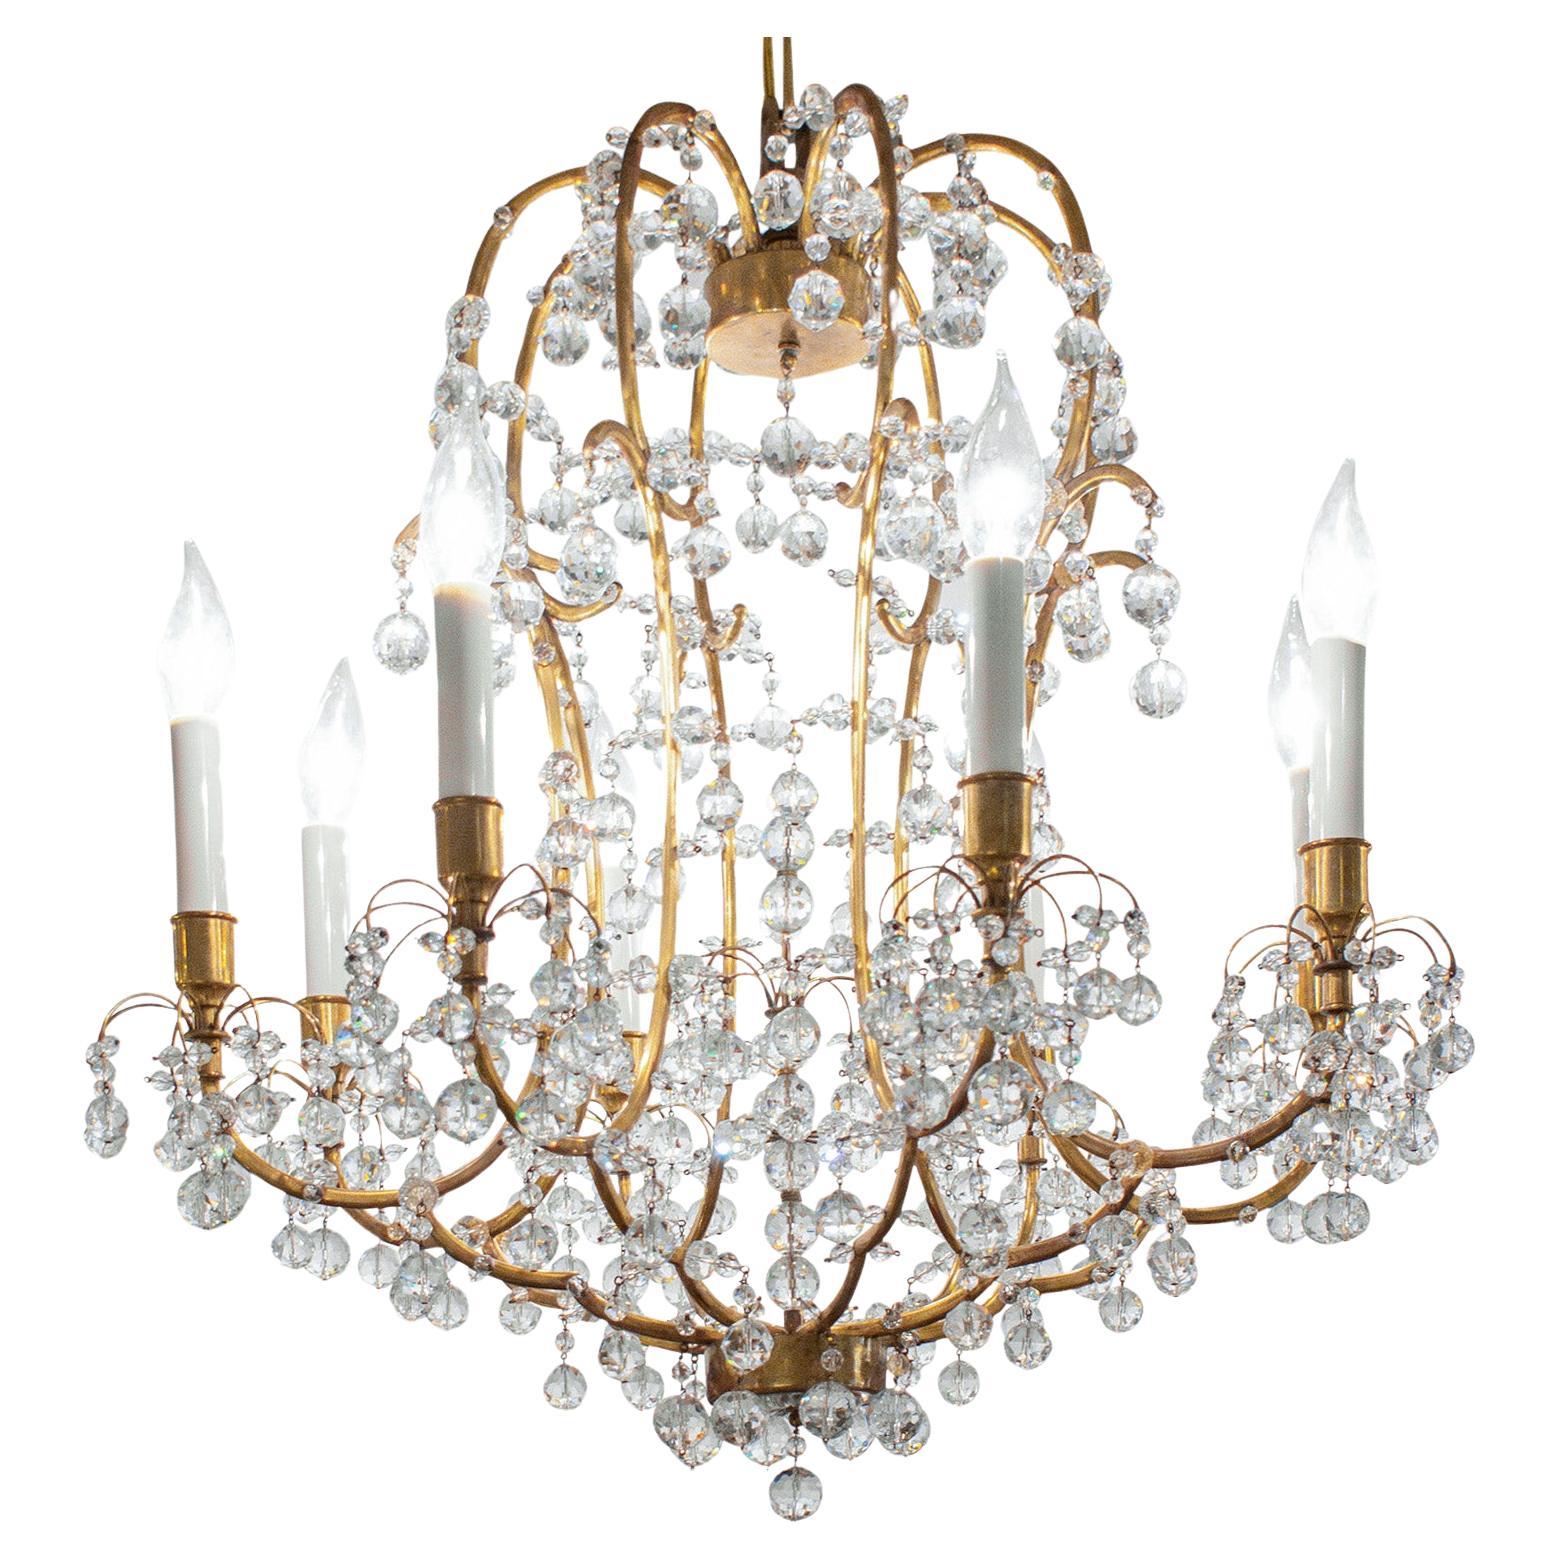 Lobmeyr Rare and Stunning Chandelier with Crystals 1959